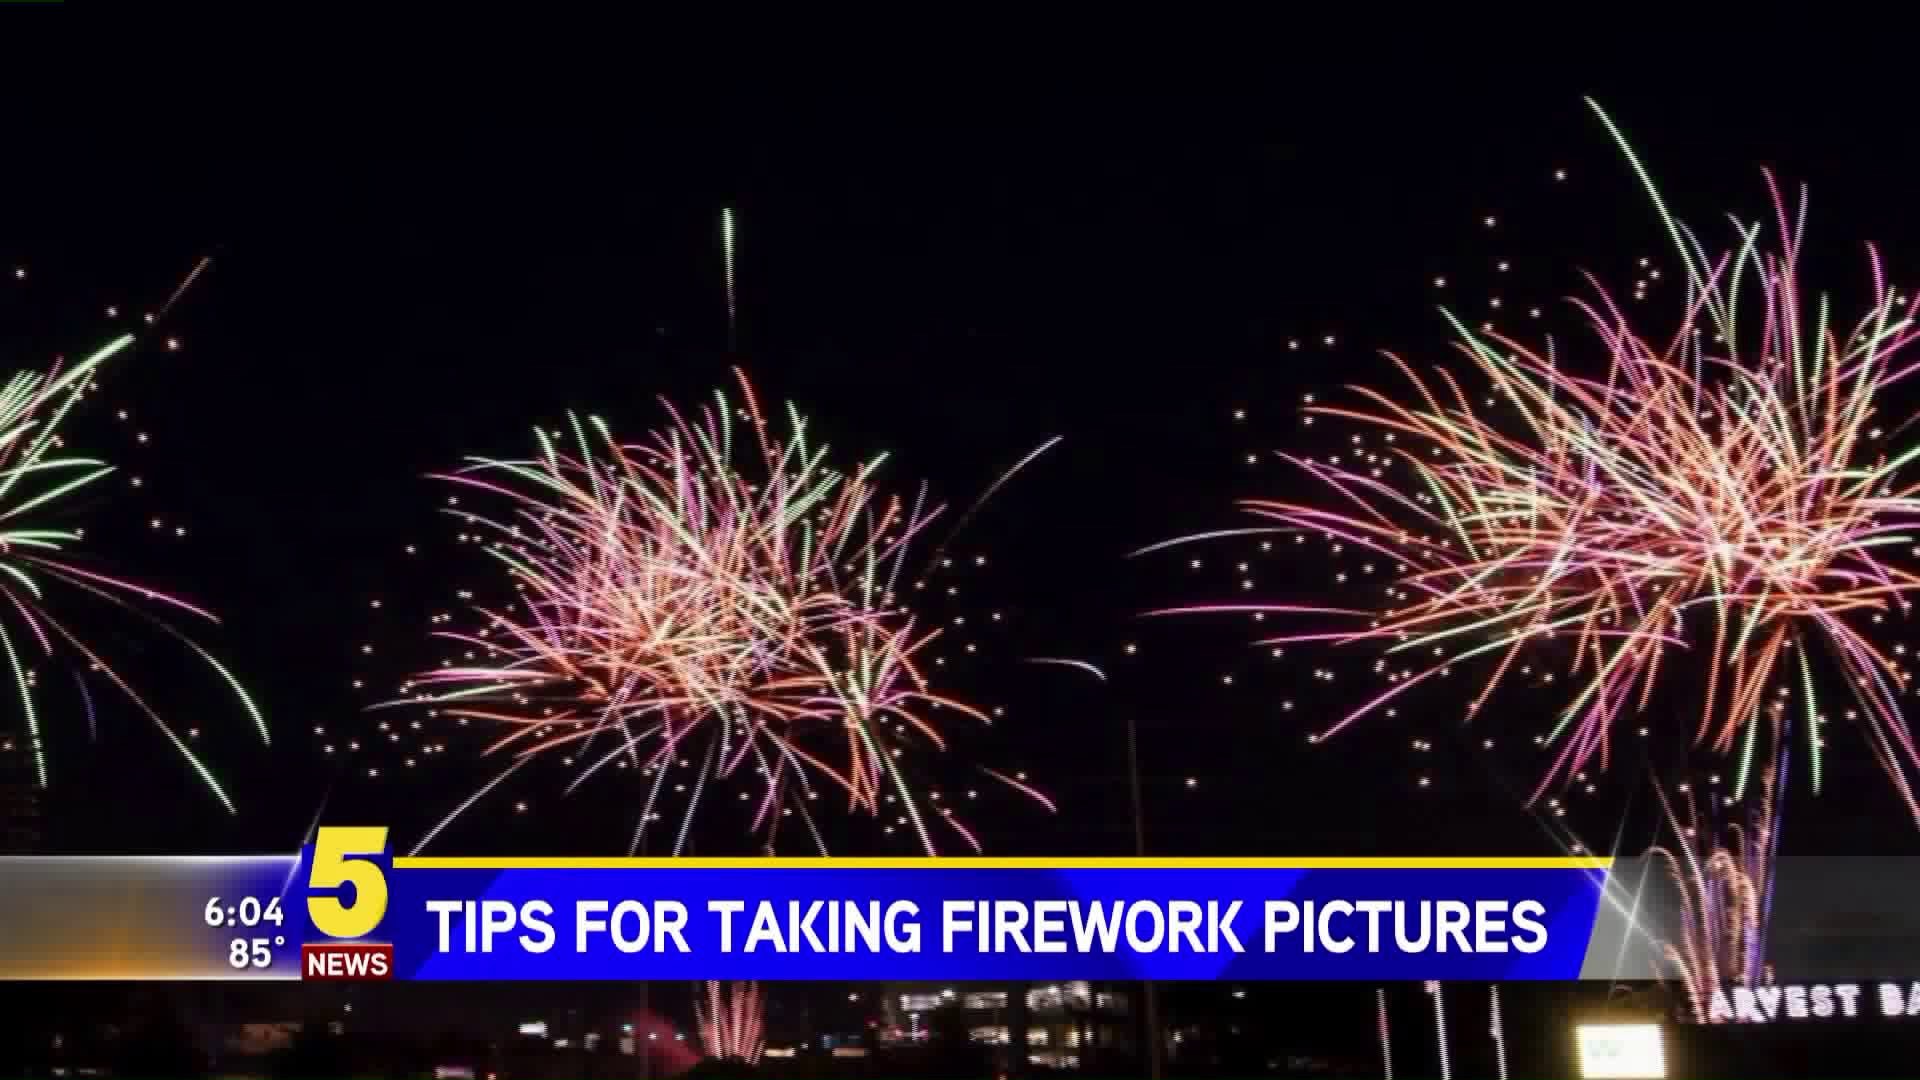 Tips For Taking Firework Pictures